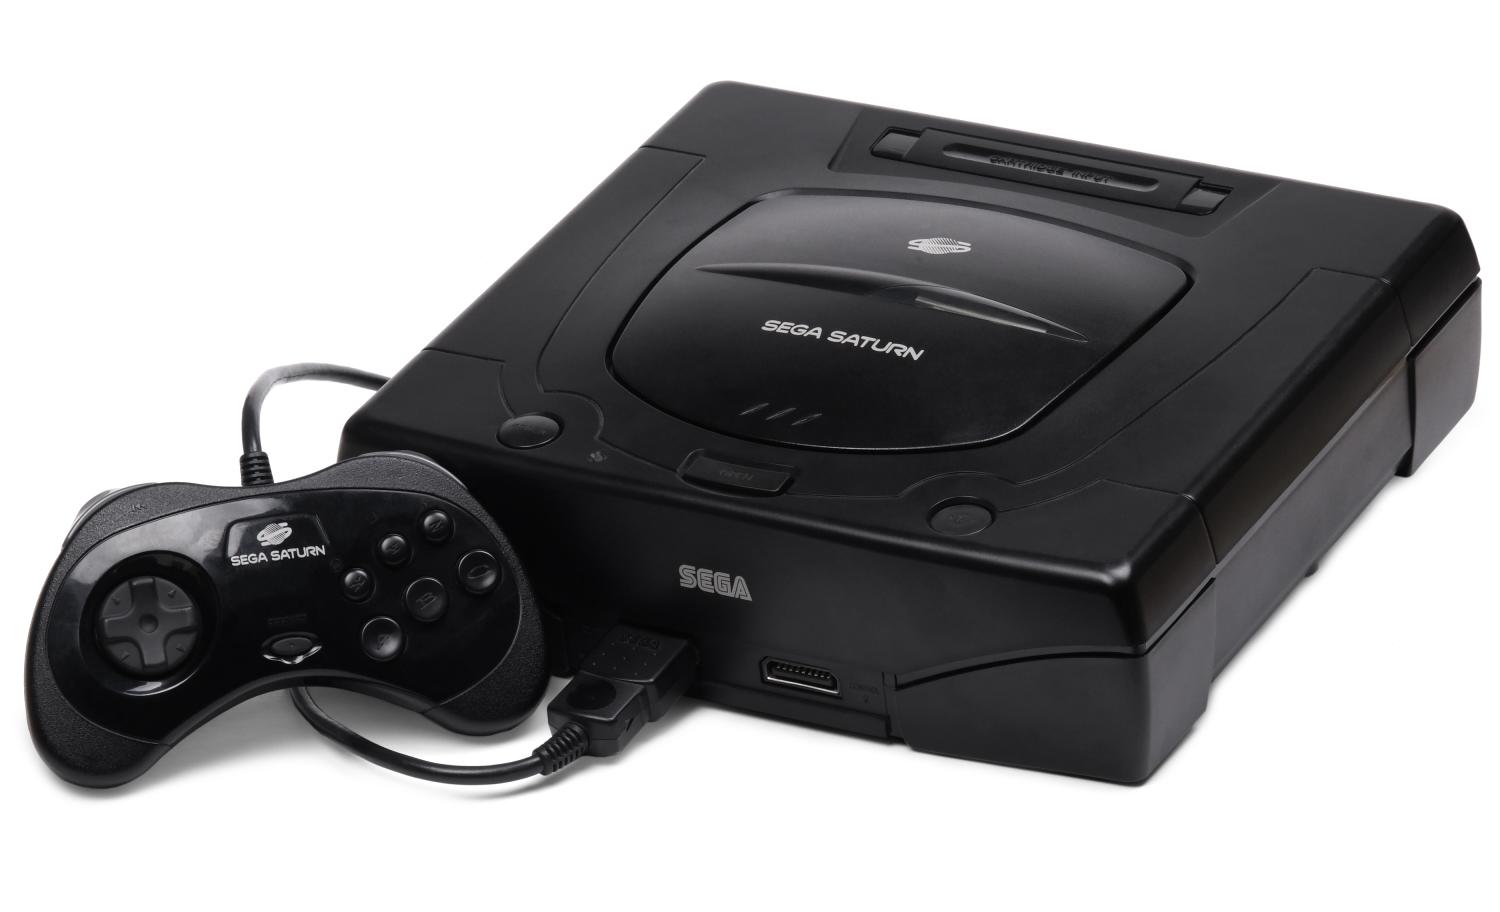 The Sega Saturn home console and controller